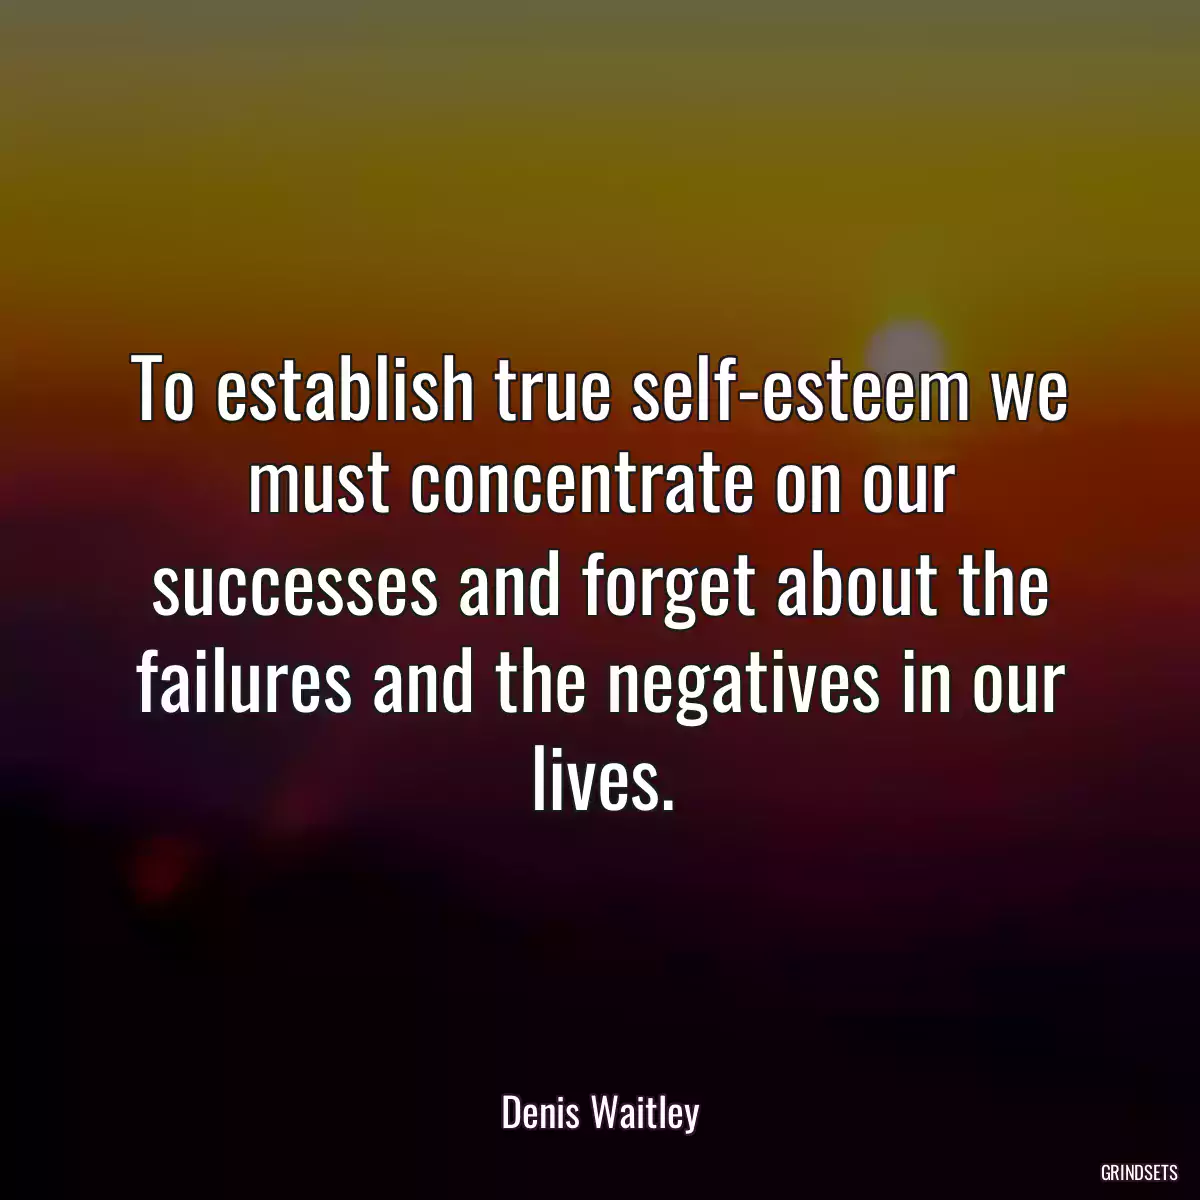 To establish true self-esteem we must concentrate on our successes and forget about the failures and the negatives in our lives.